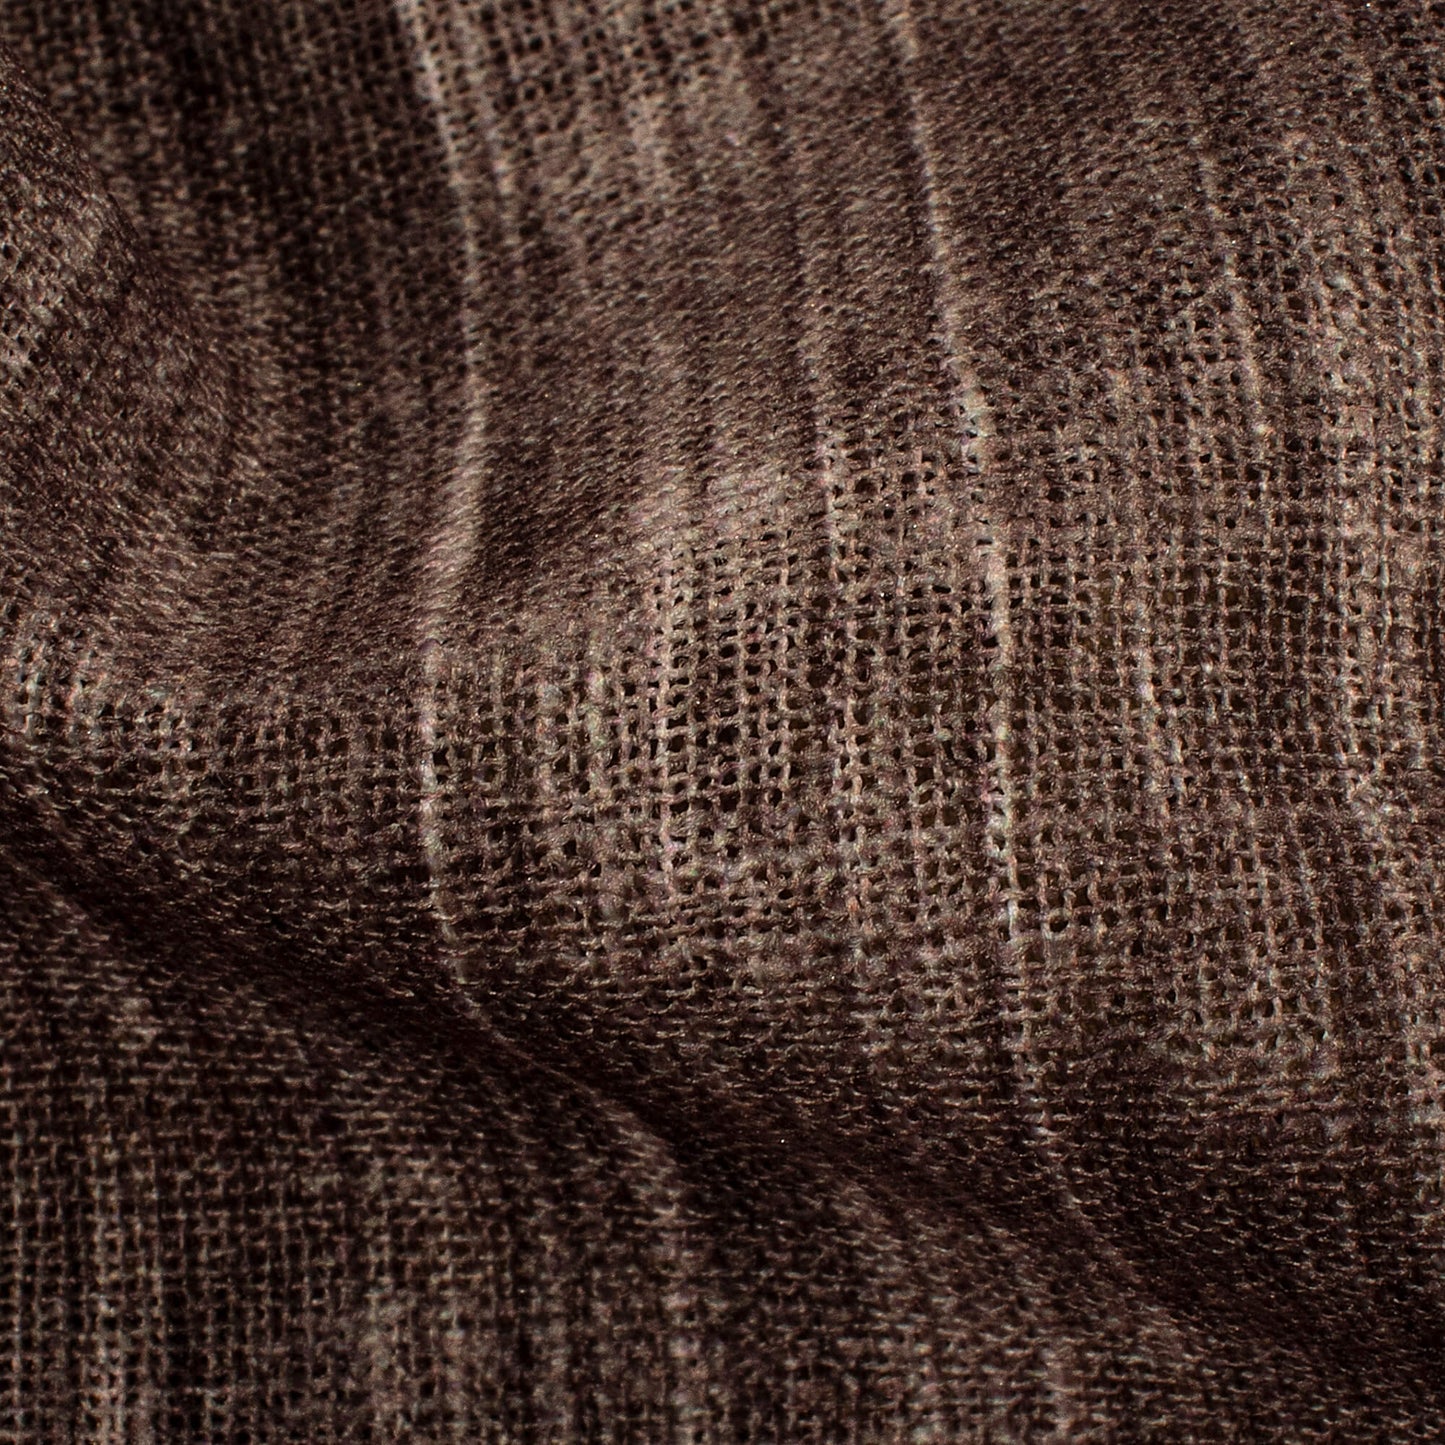 Umber Brown Textured Premium Sheer Fabric (Width 54 Inches)